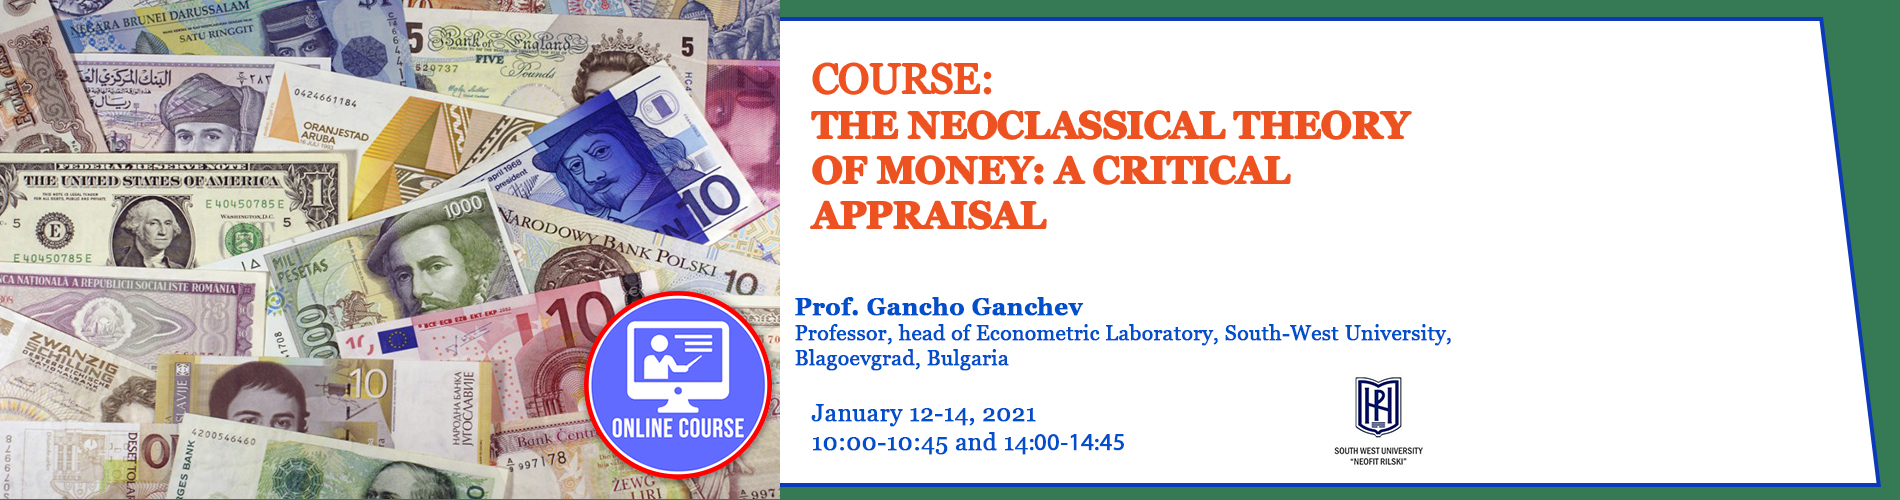 12-14.01.2021---The neoclassical theory of money - a critical appraisal